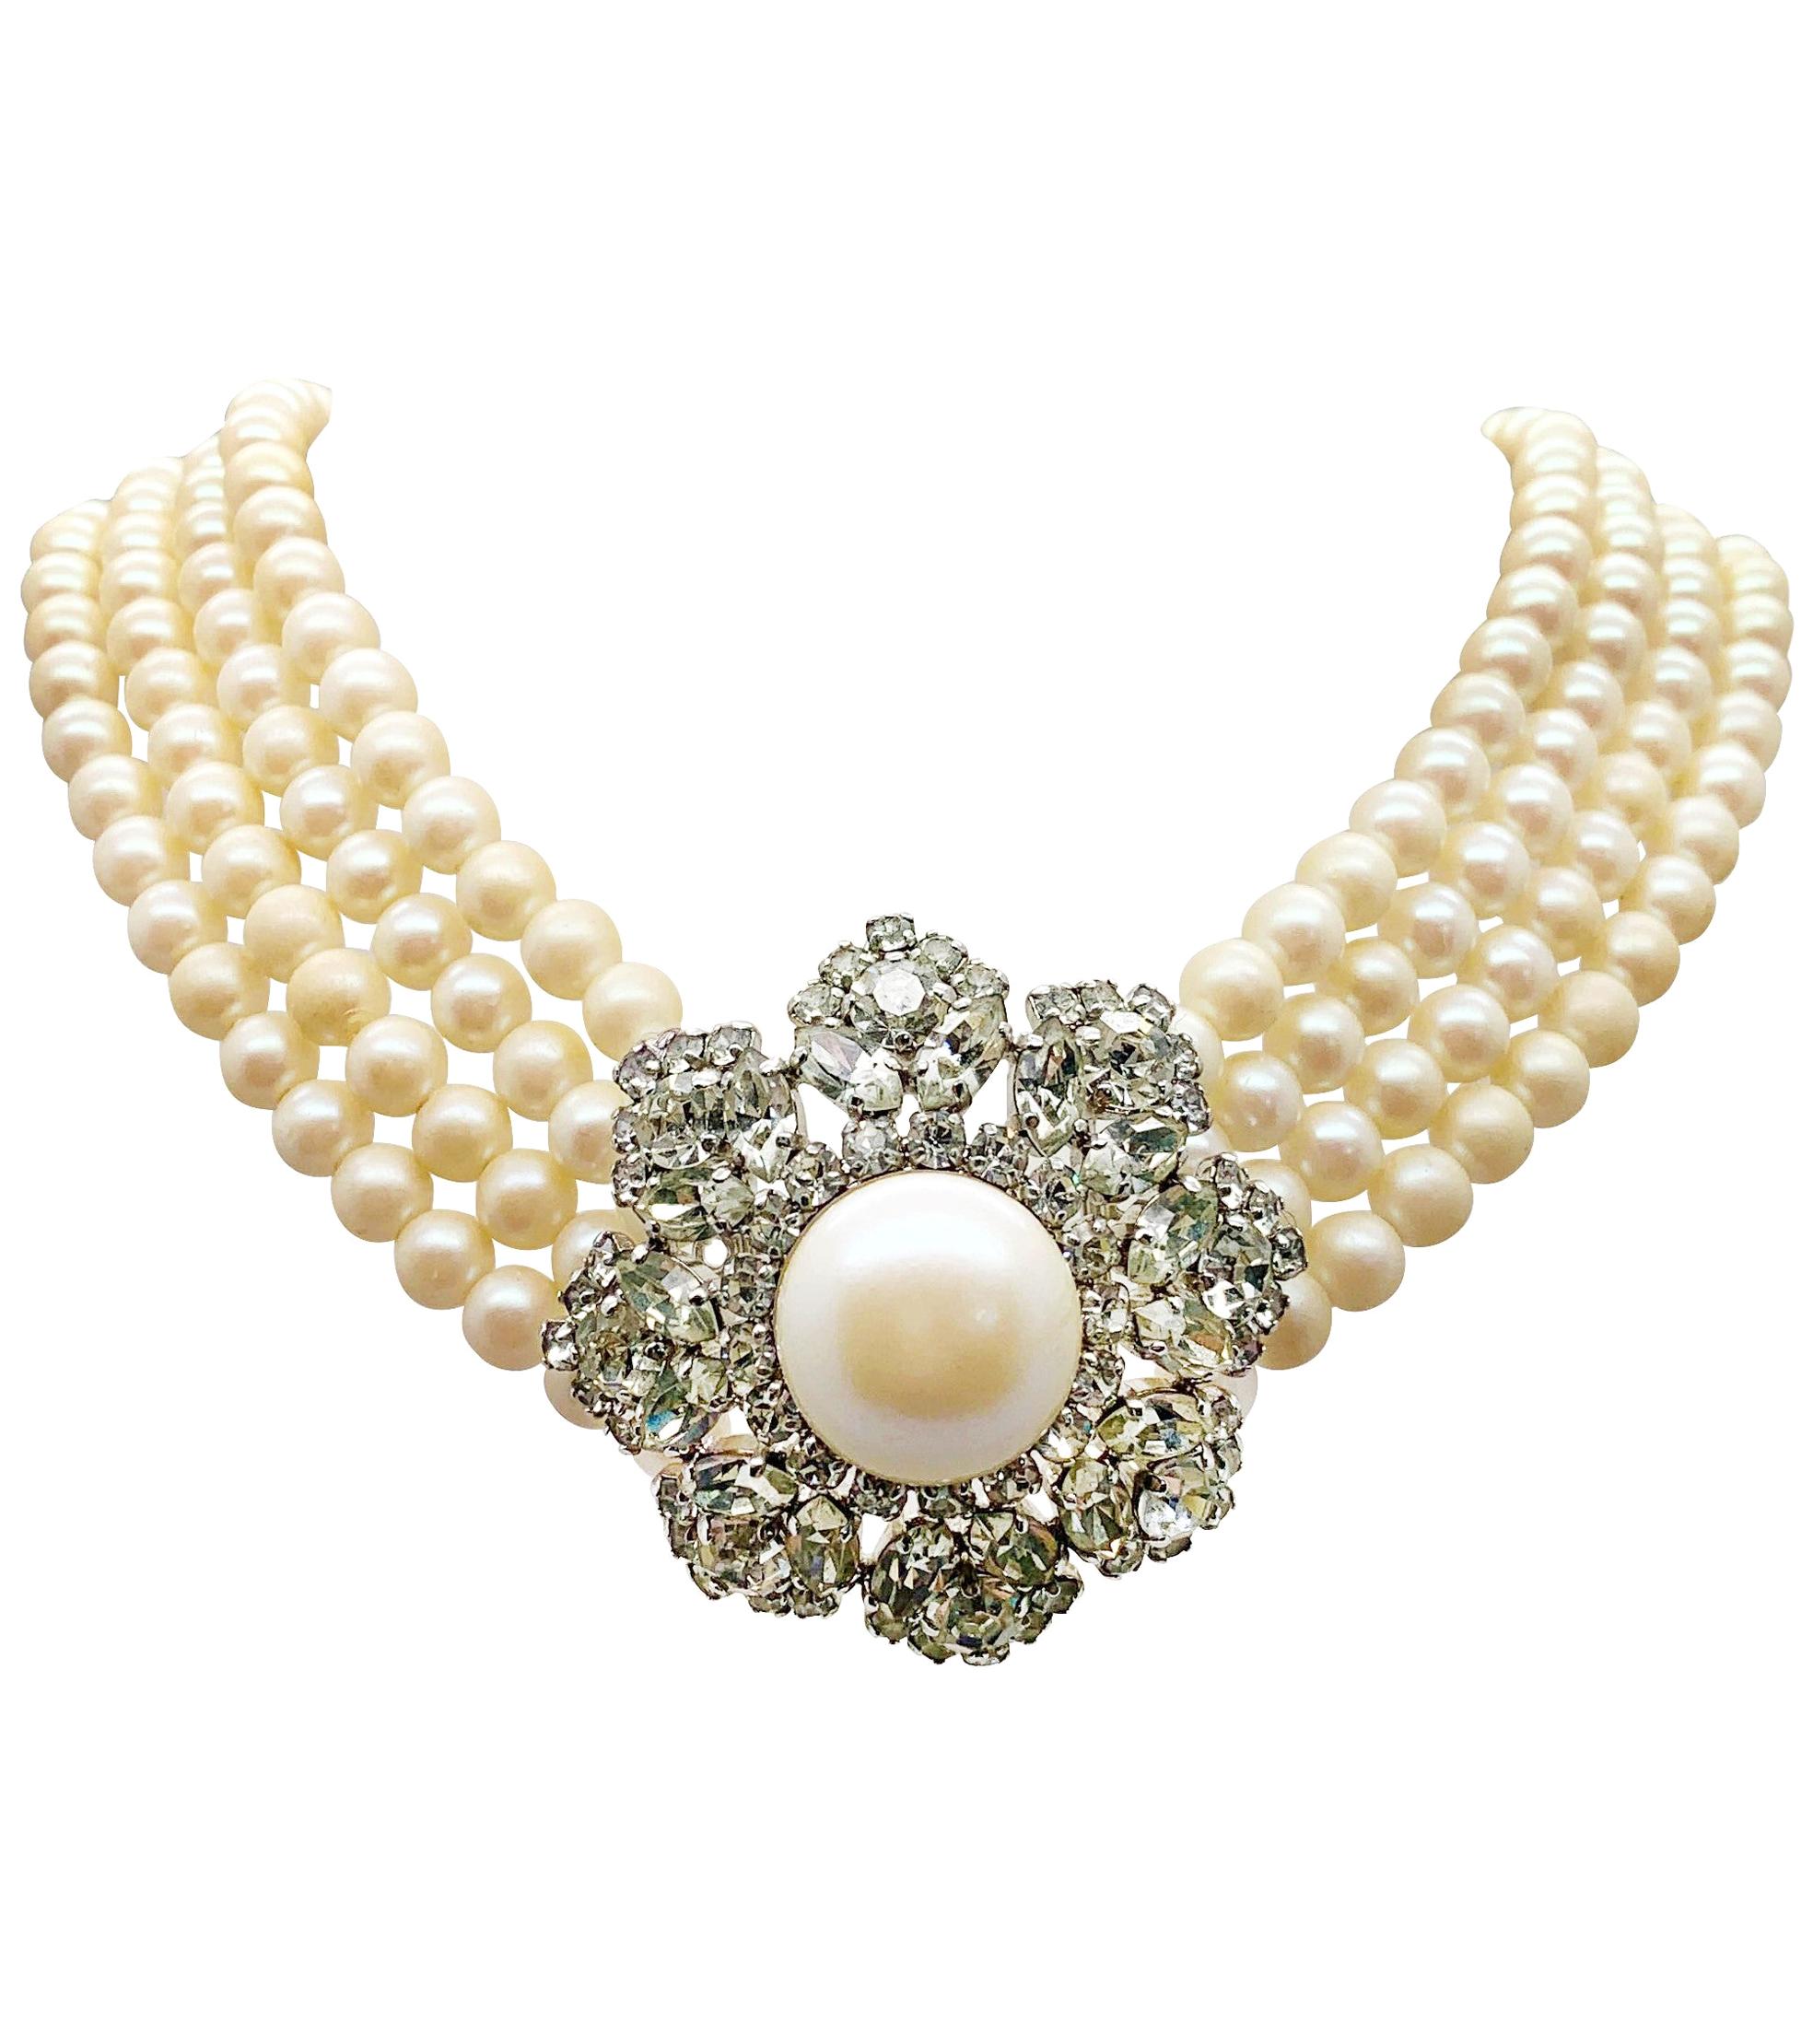 Vintage Christian Dior Pearl & Fancy Cut Crystal Statement Choker Necklace 1970